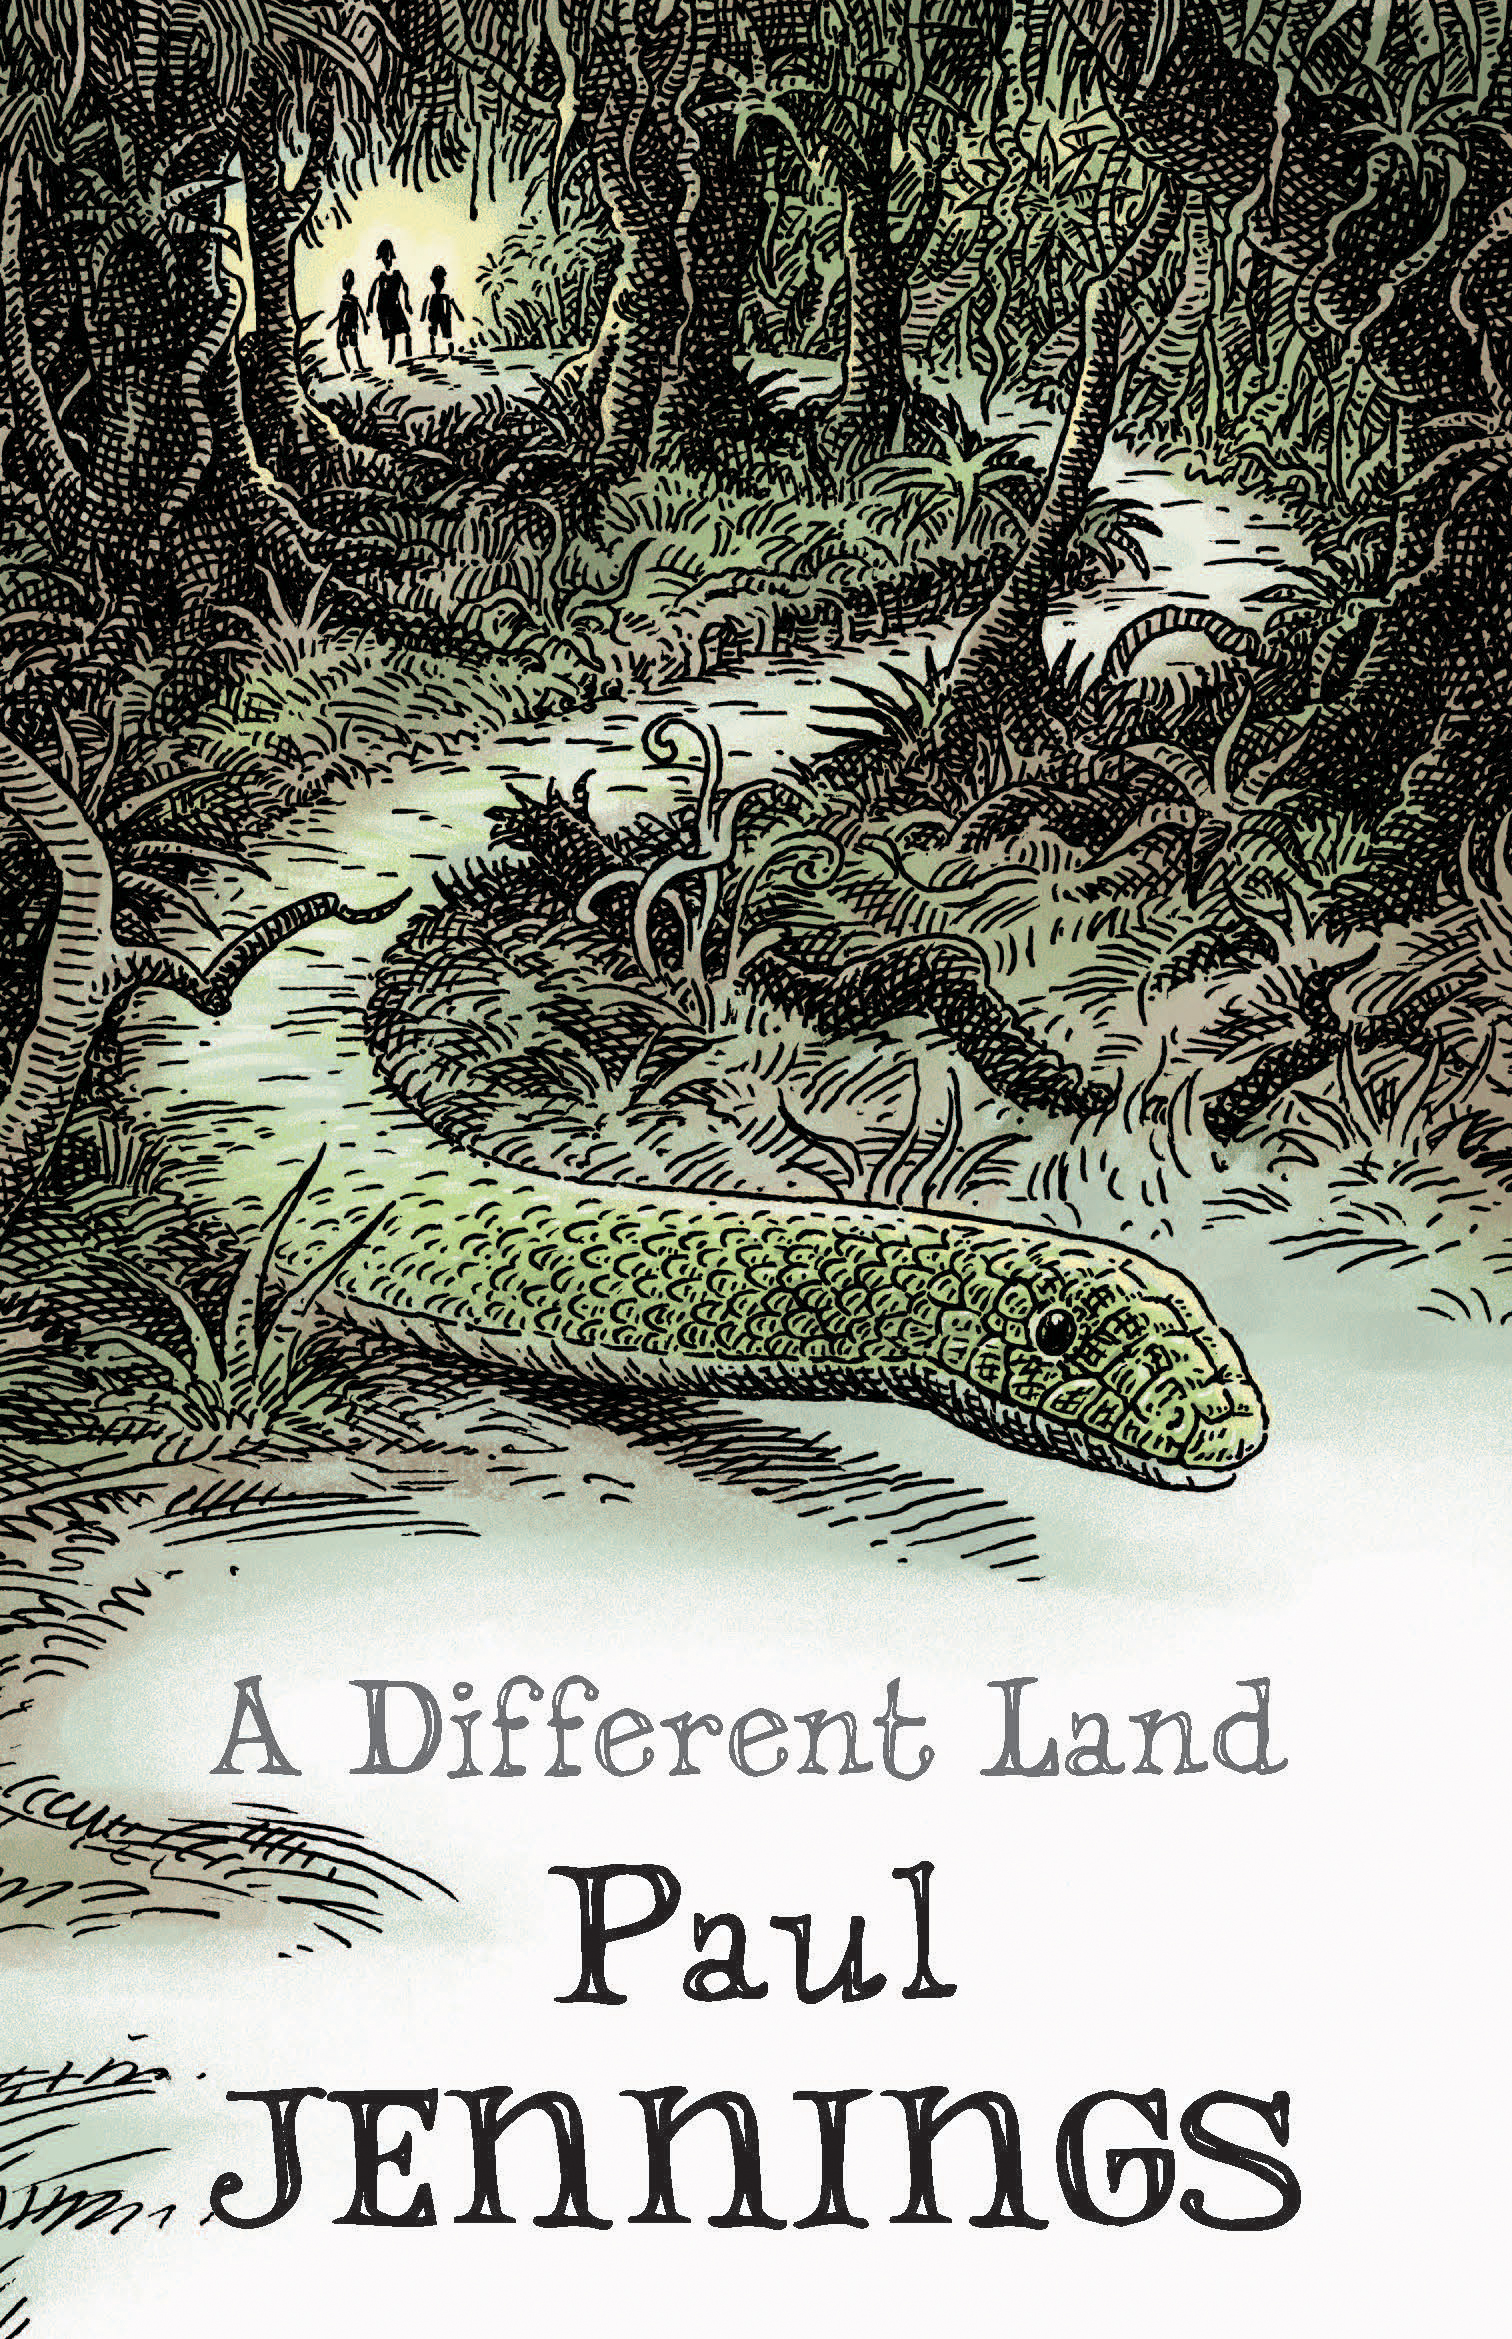 The cover of 'A different land' by Paul Jennings